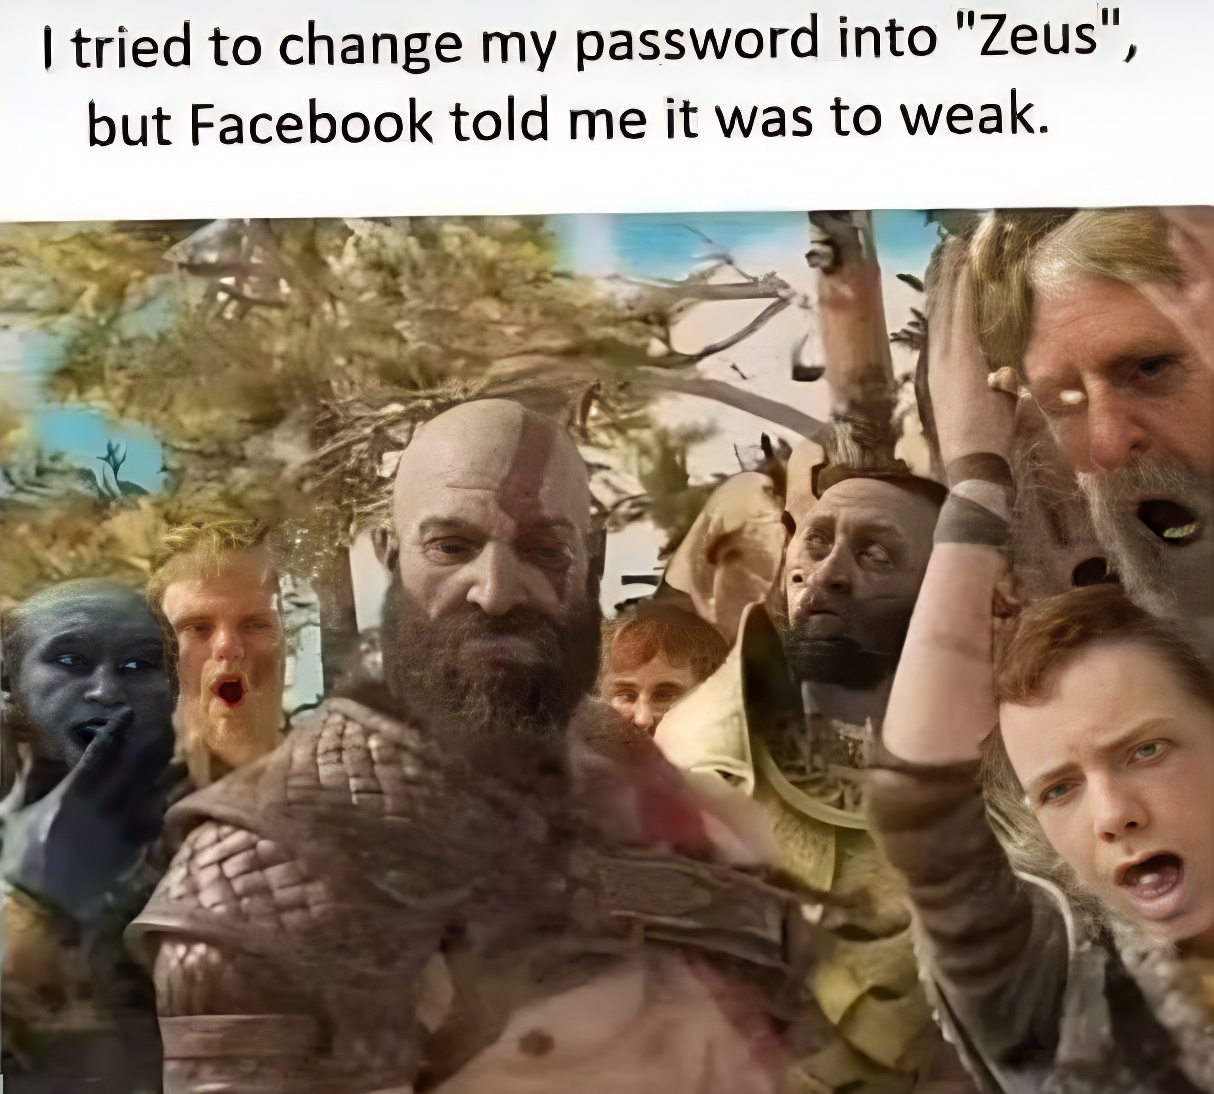 funny memes - tried to change my password into zeus - I tried to change my password into "Zeus", but Facebook told me it was to weak.